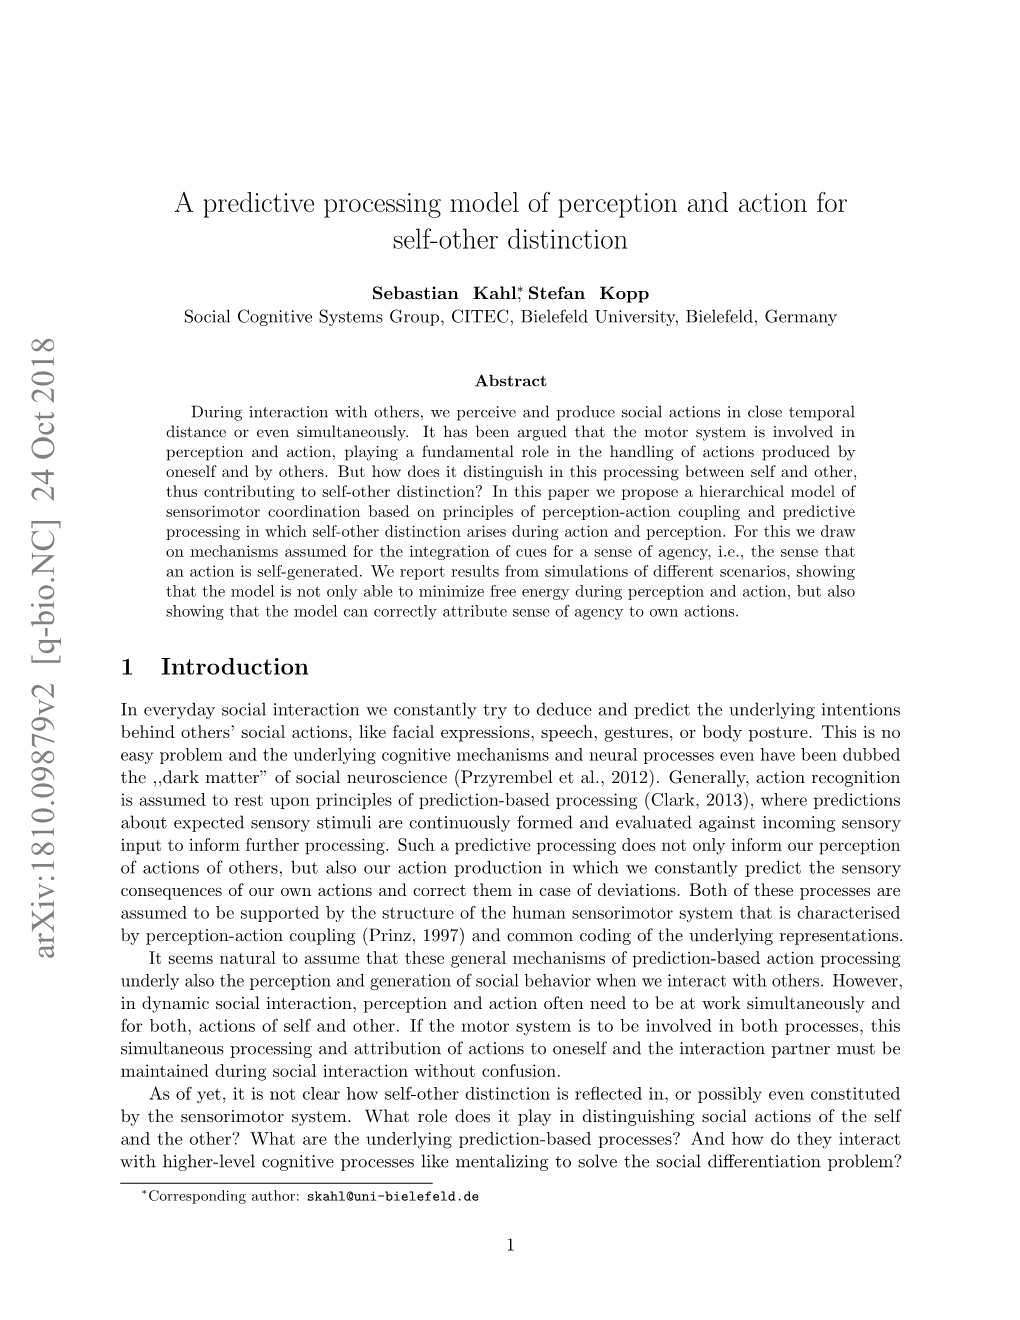 A Predictive Processing Model of Perception and Action for Self-Other Distinction